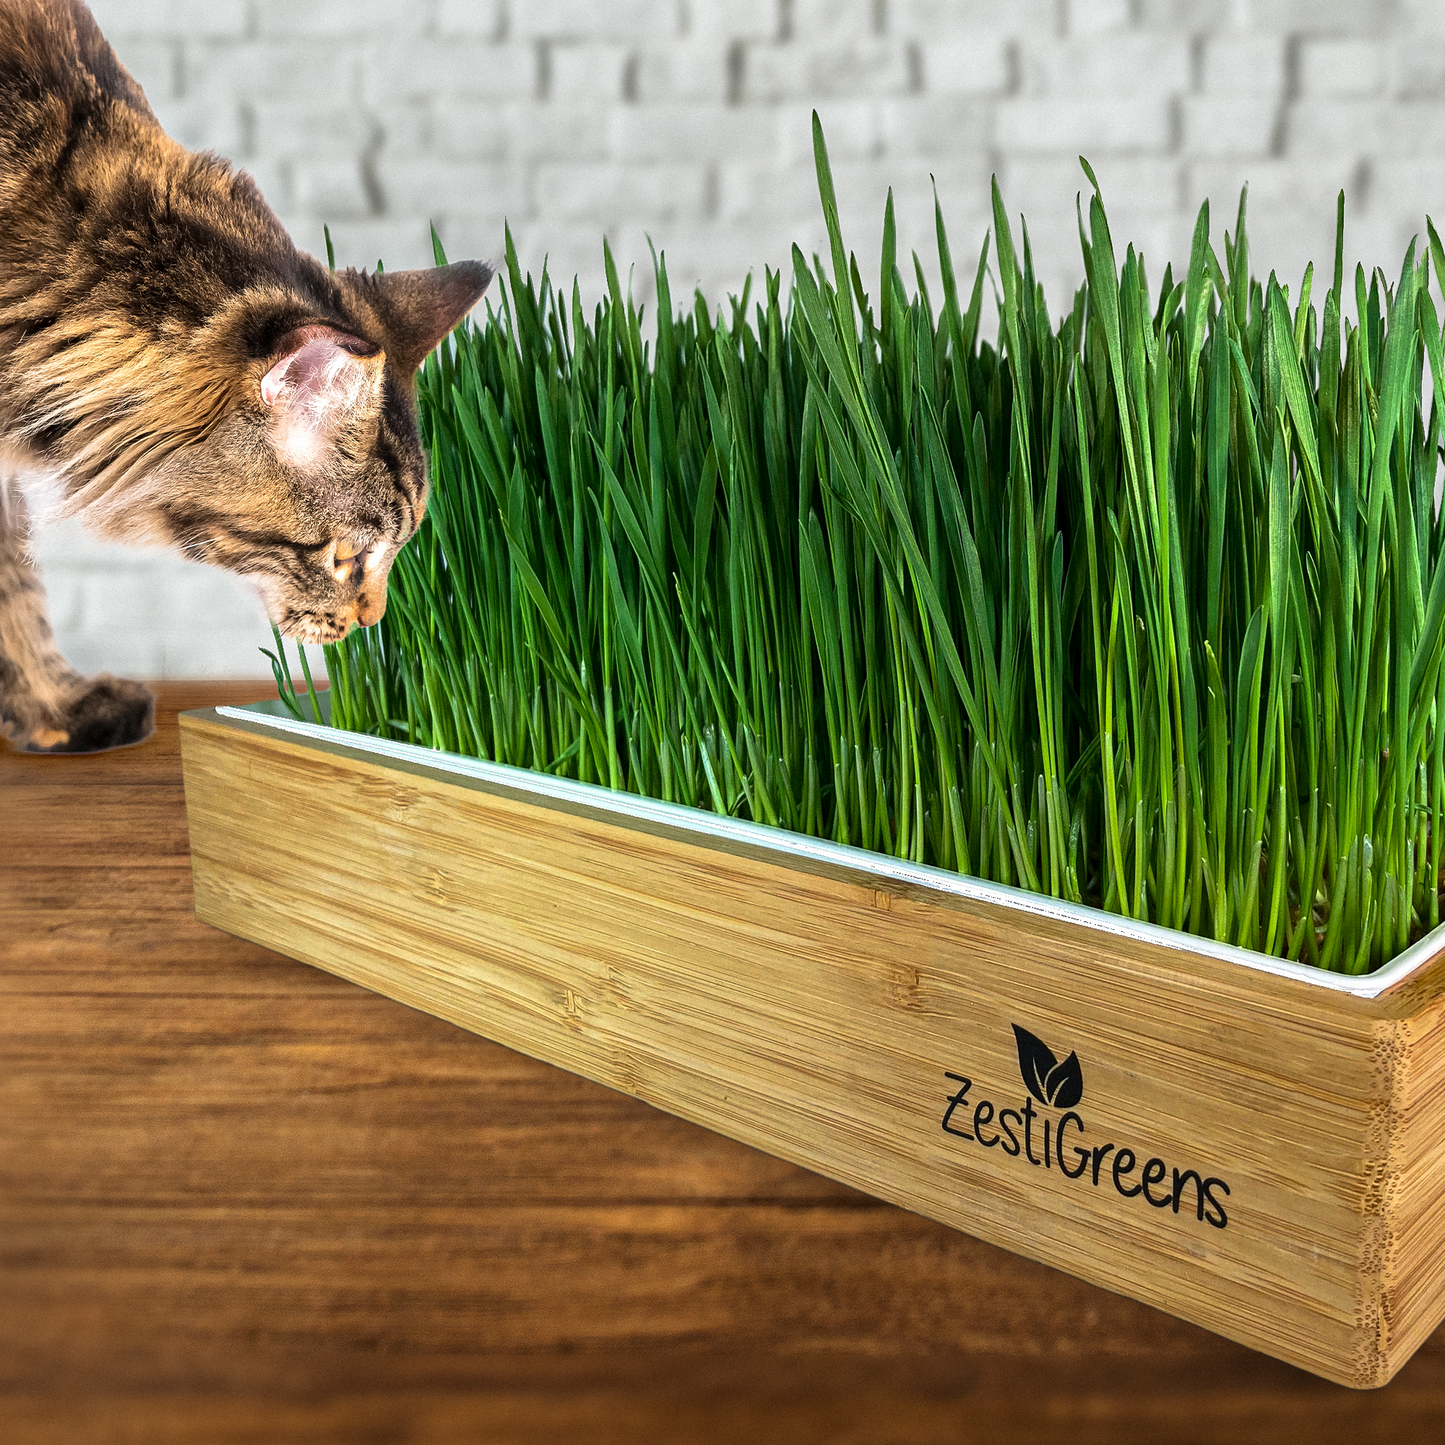 
                  
                    Self Watering Cat Grass Kit. Hands Down The Easiest Way to Grow Cat Grass. Everything Included to Grow 2 Large Crops of Delicious Cat Grass.
                  
                